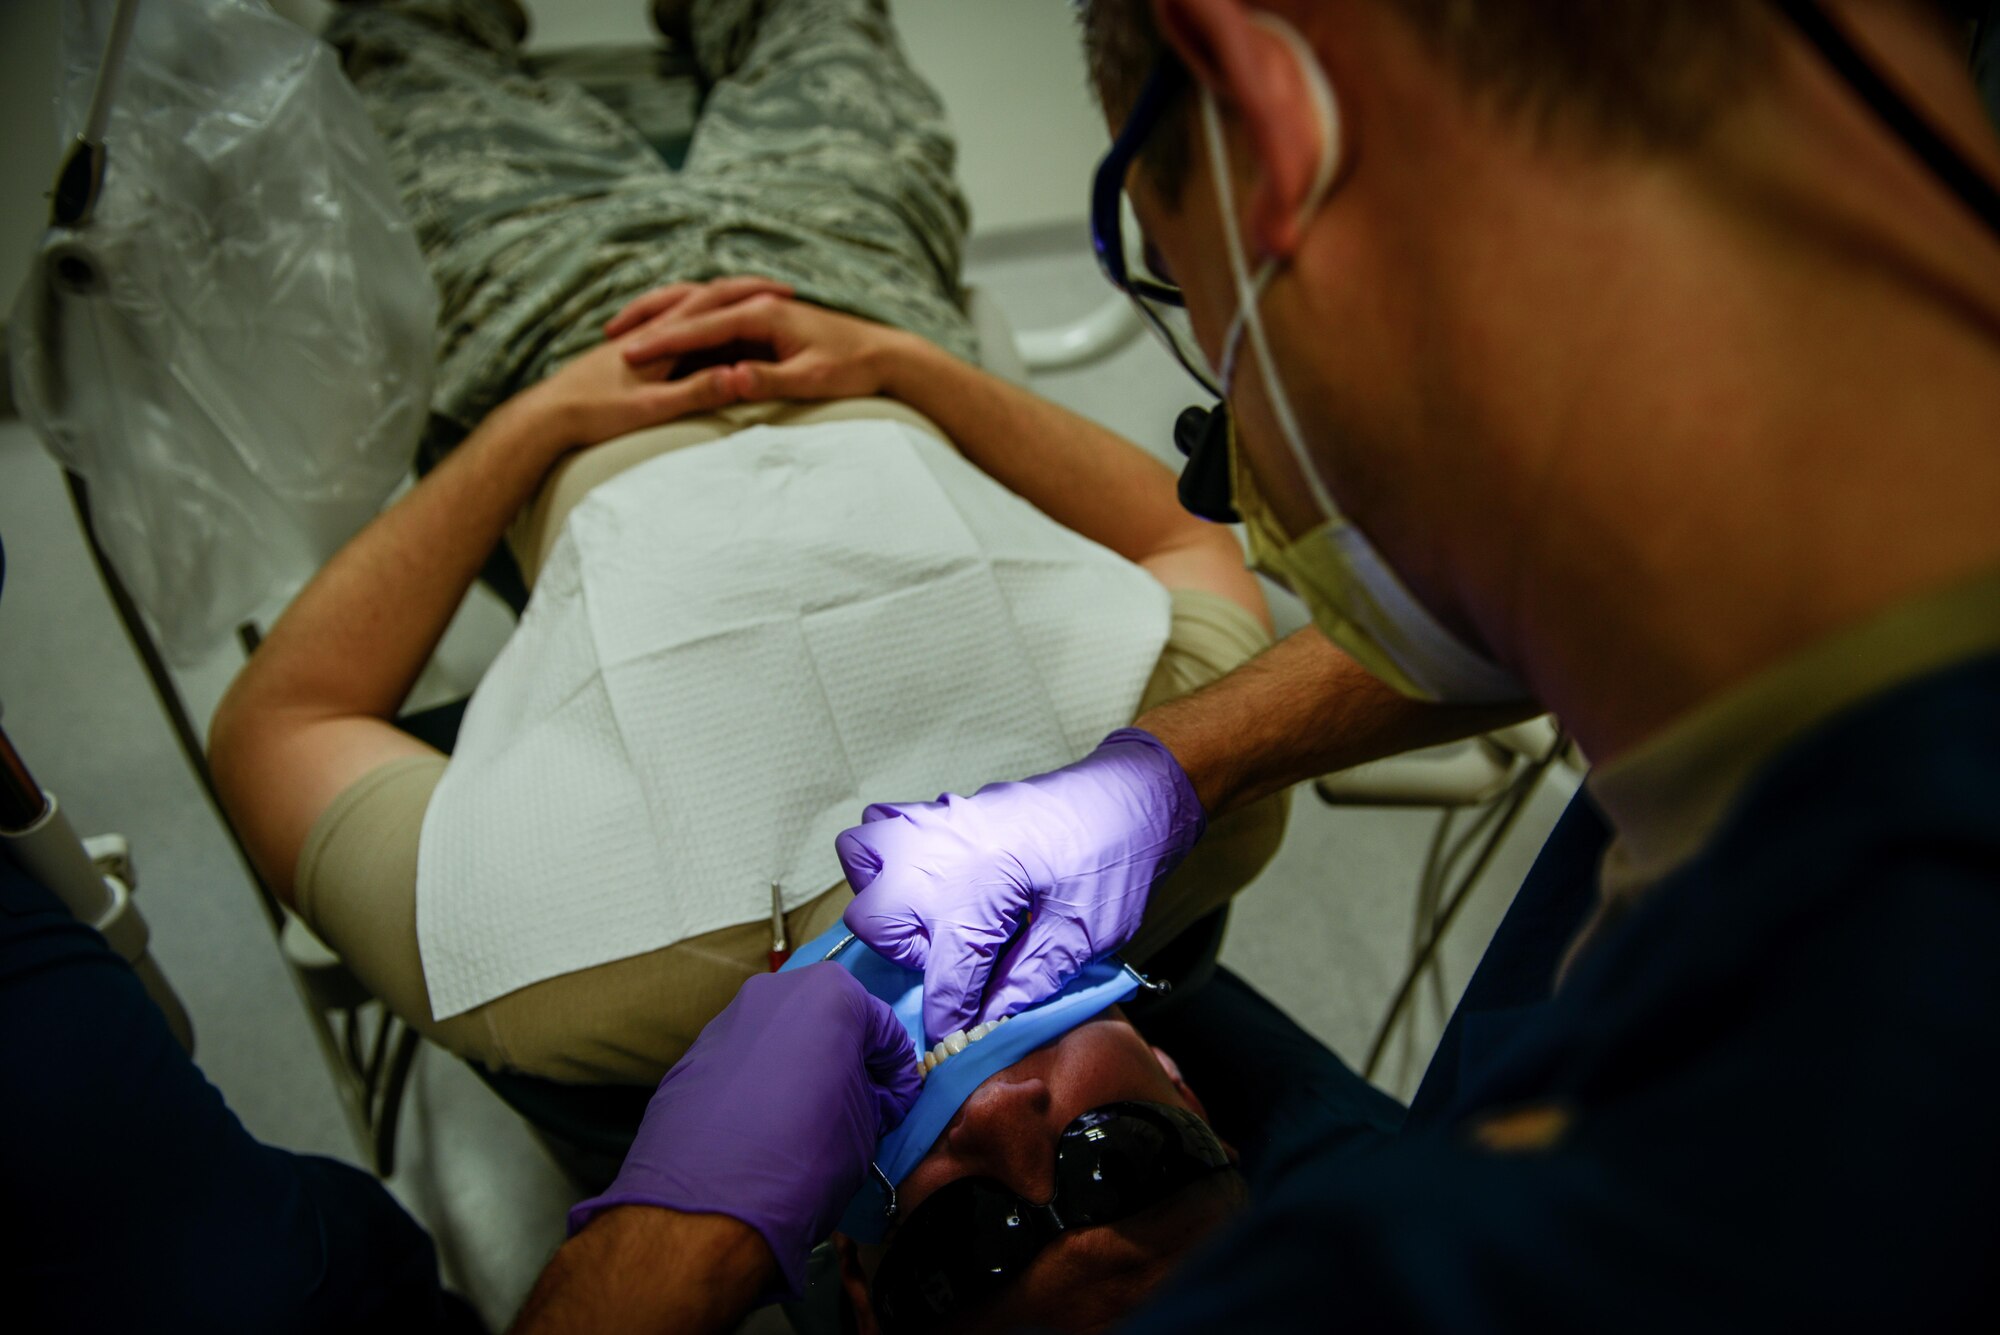 Senior Airman Benjamin Martinez, 86th Dental Squadron oral preventative technician, cleans the teeth of a patient July 1, 2016, at Ramstein Air Base, Germany. The clinic sees more than 250 patients a day and offers services that include general dentistry, orthodontics, periodontics, prosthodontics, endodontics, oral surgery and preventative dentistry and has both an area and base dental lab. (U.S. Air Force photo/Senior Airman Nicole Keim)